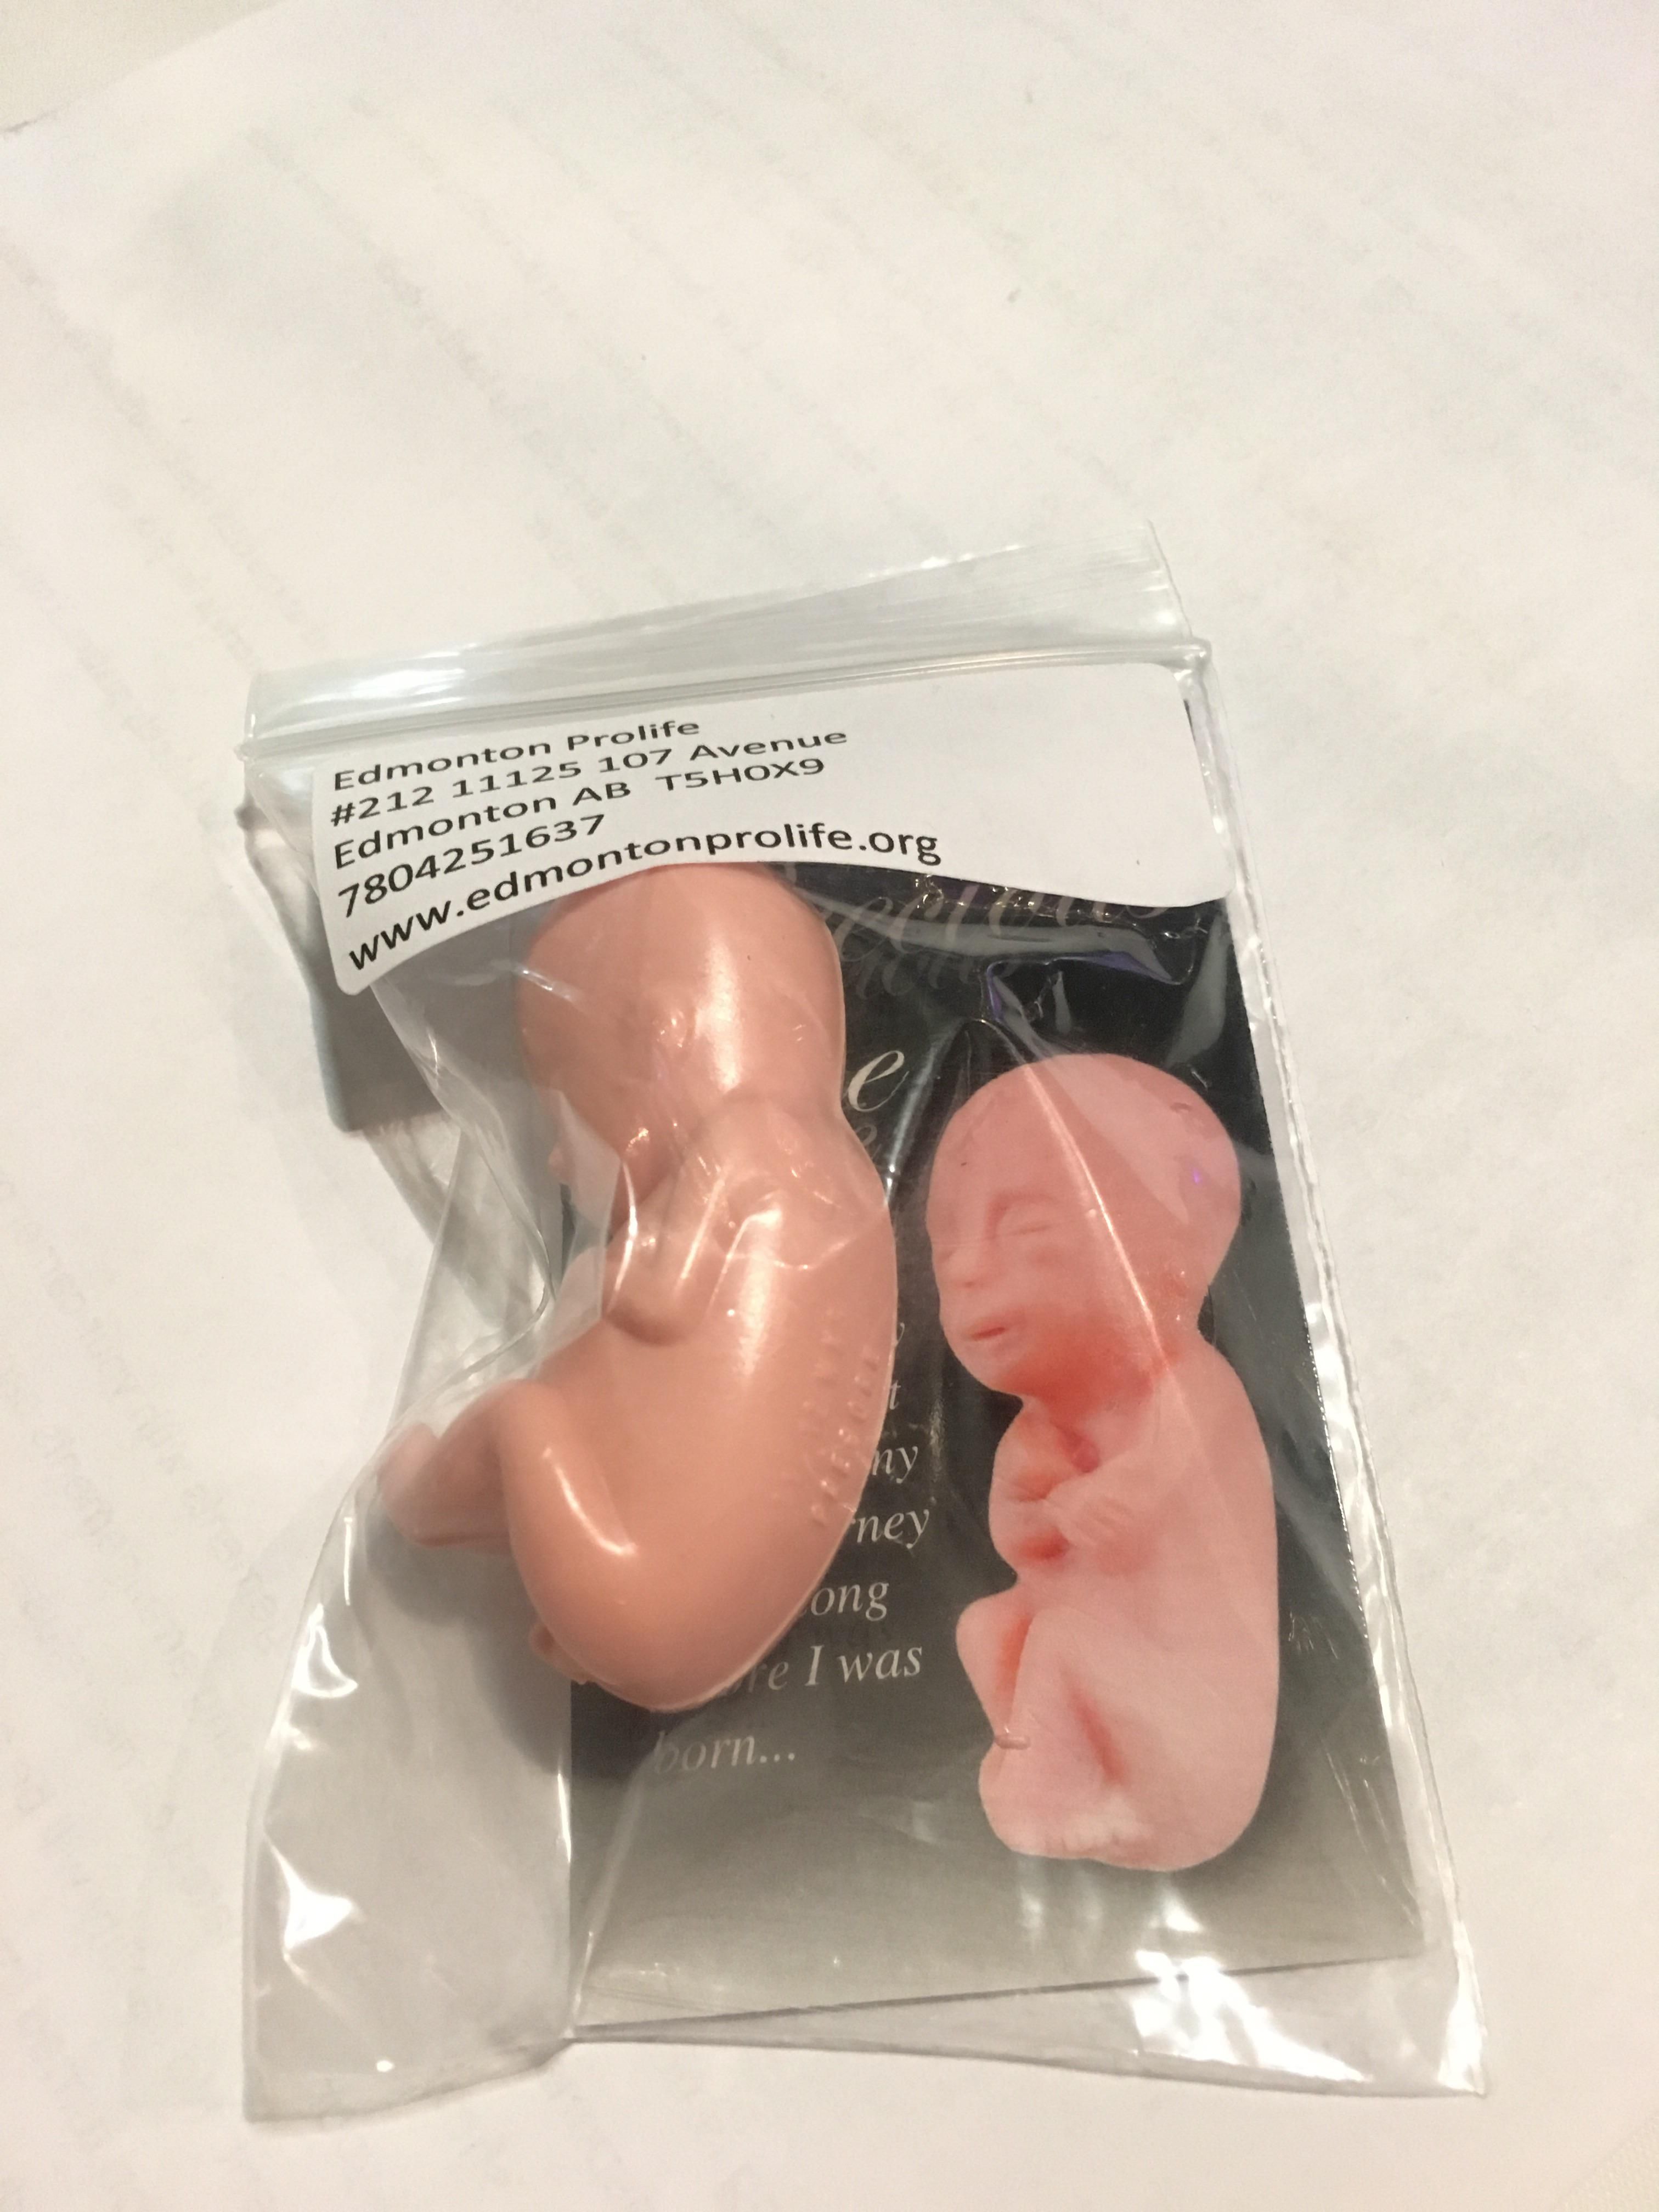 A pro-life table at a teacher’s convention is giving away fetus erasers. This is the true height of irony.